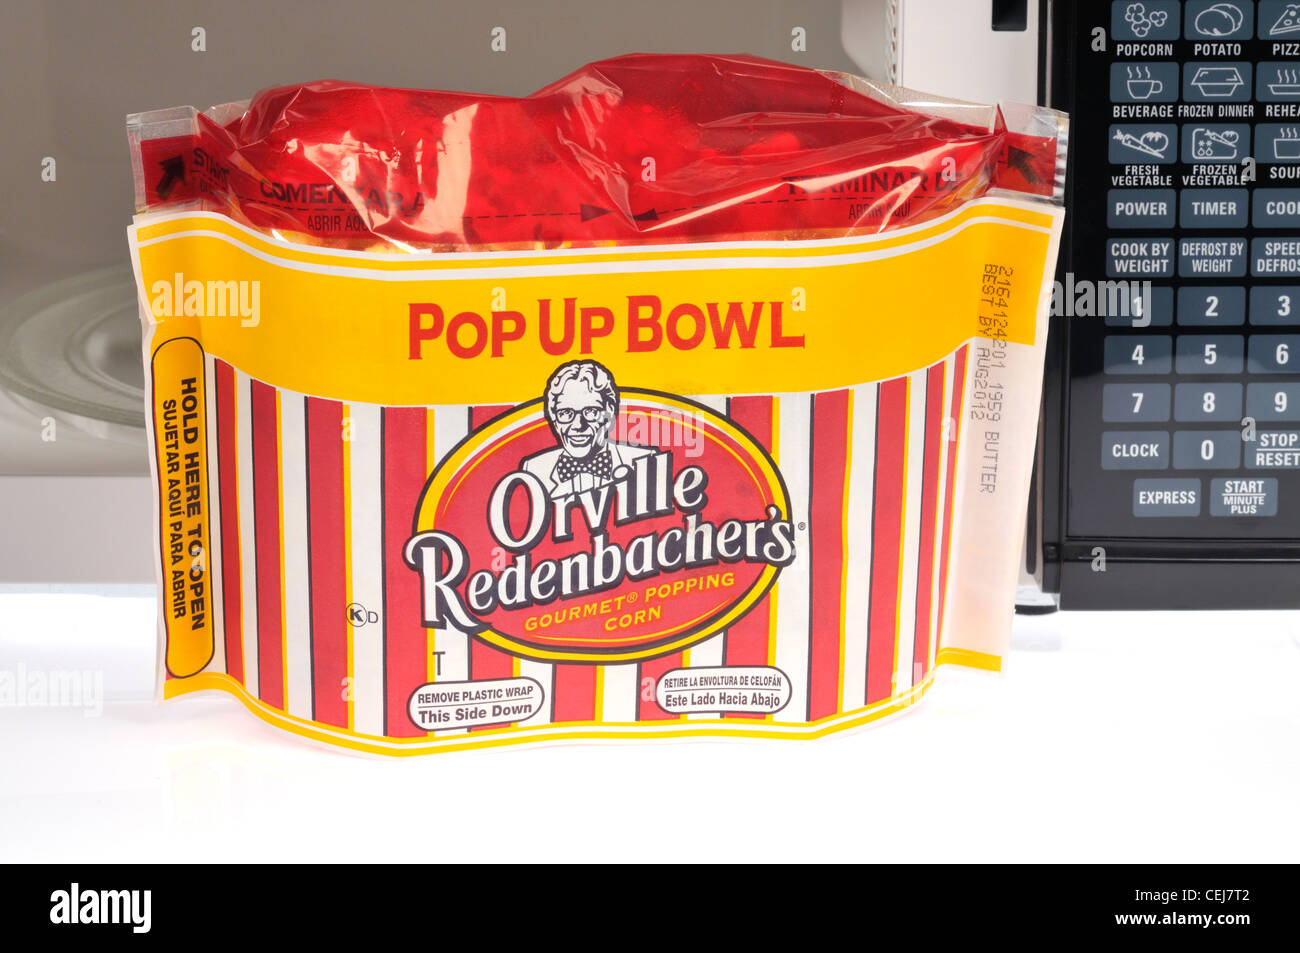 Popup Bowl of Orville Redenbacher microwave popcorn in front of microwave oven Stock Photo